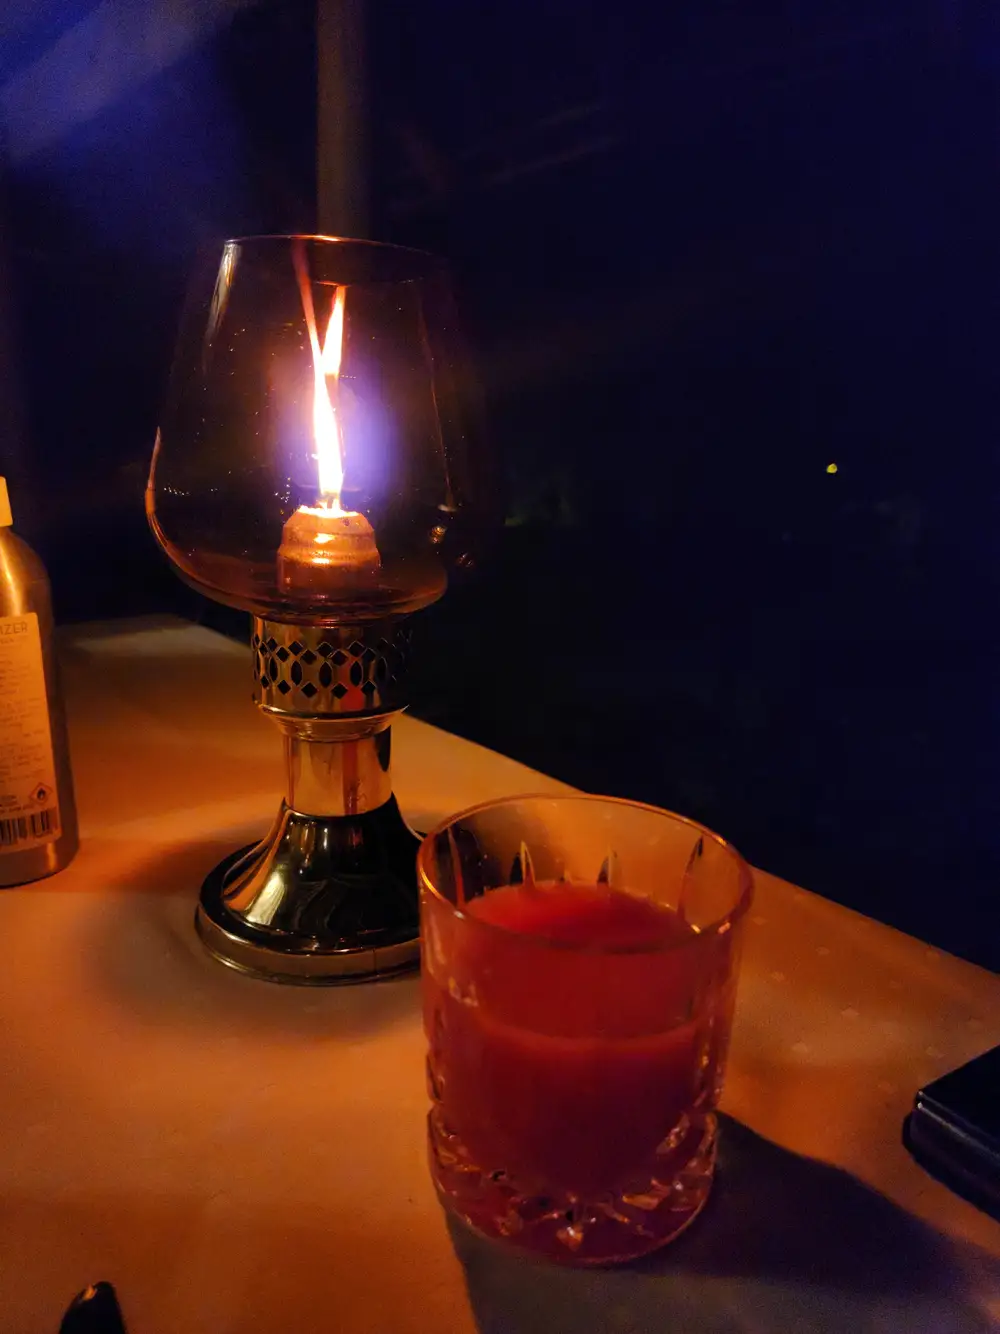 A drink and a lit candle on a table